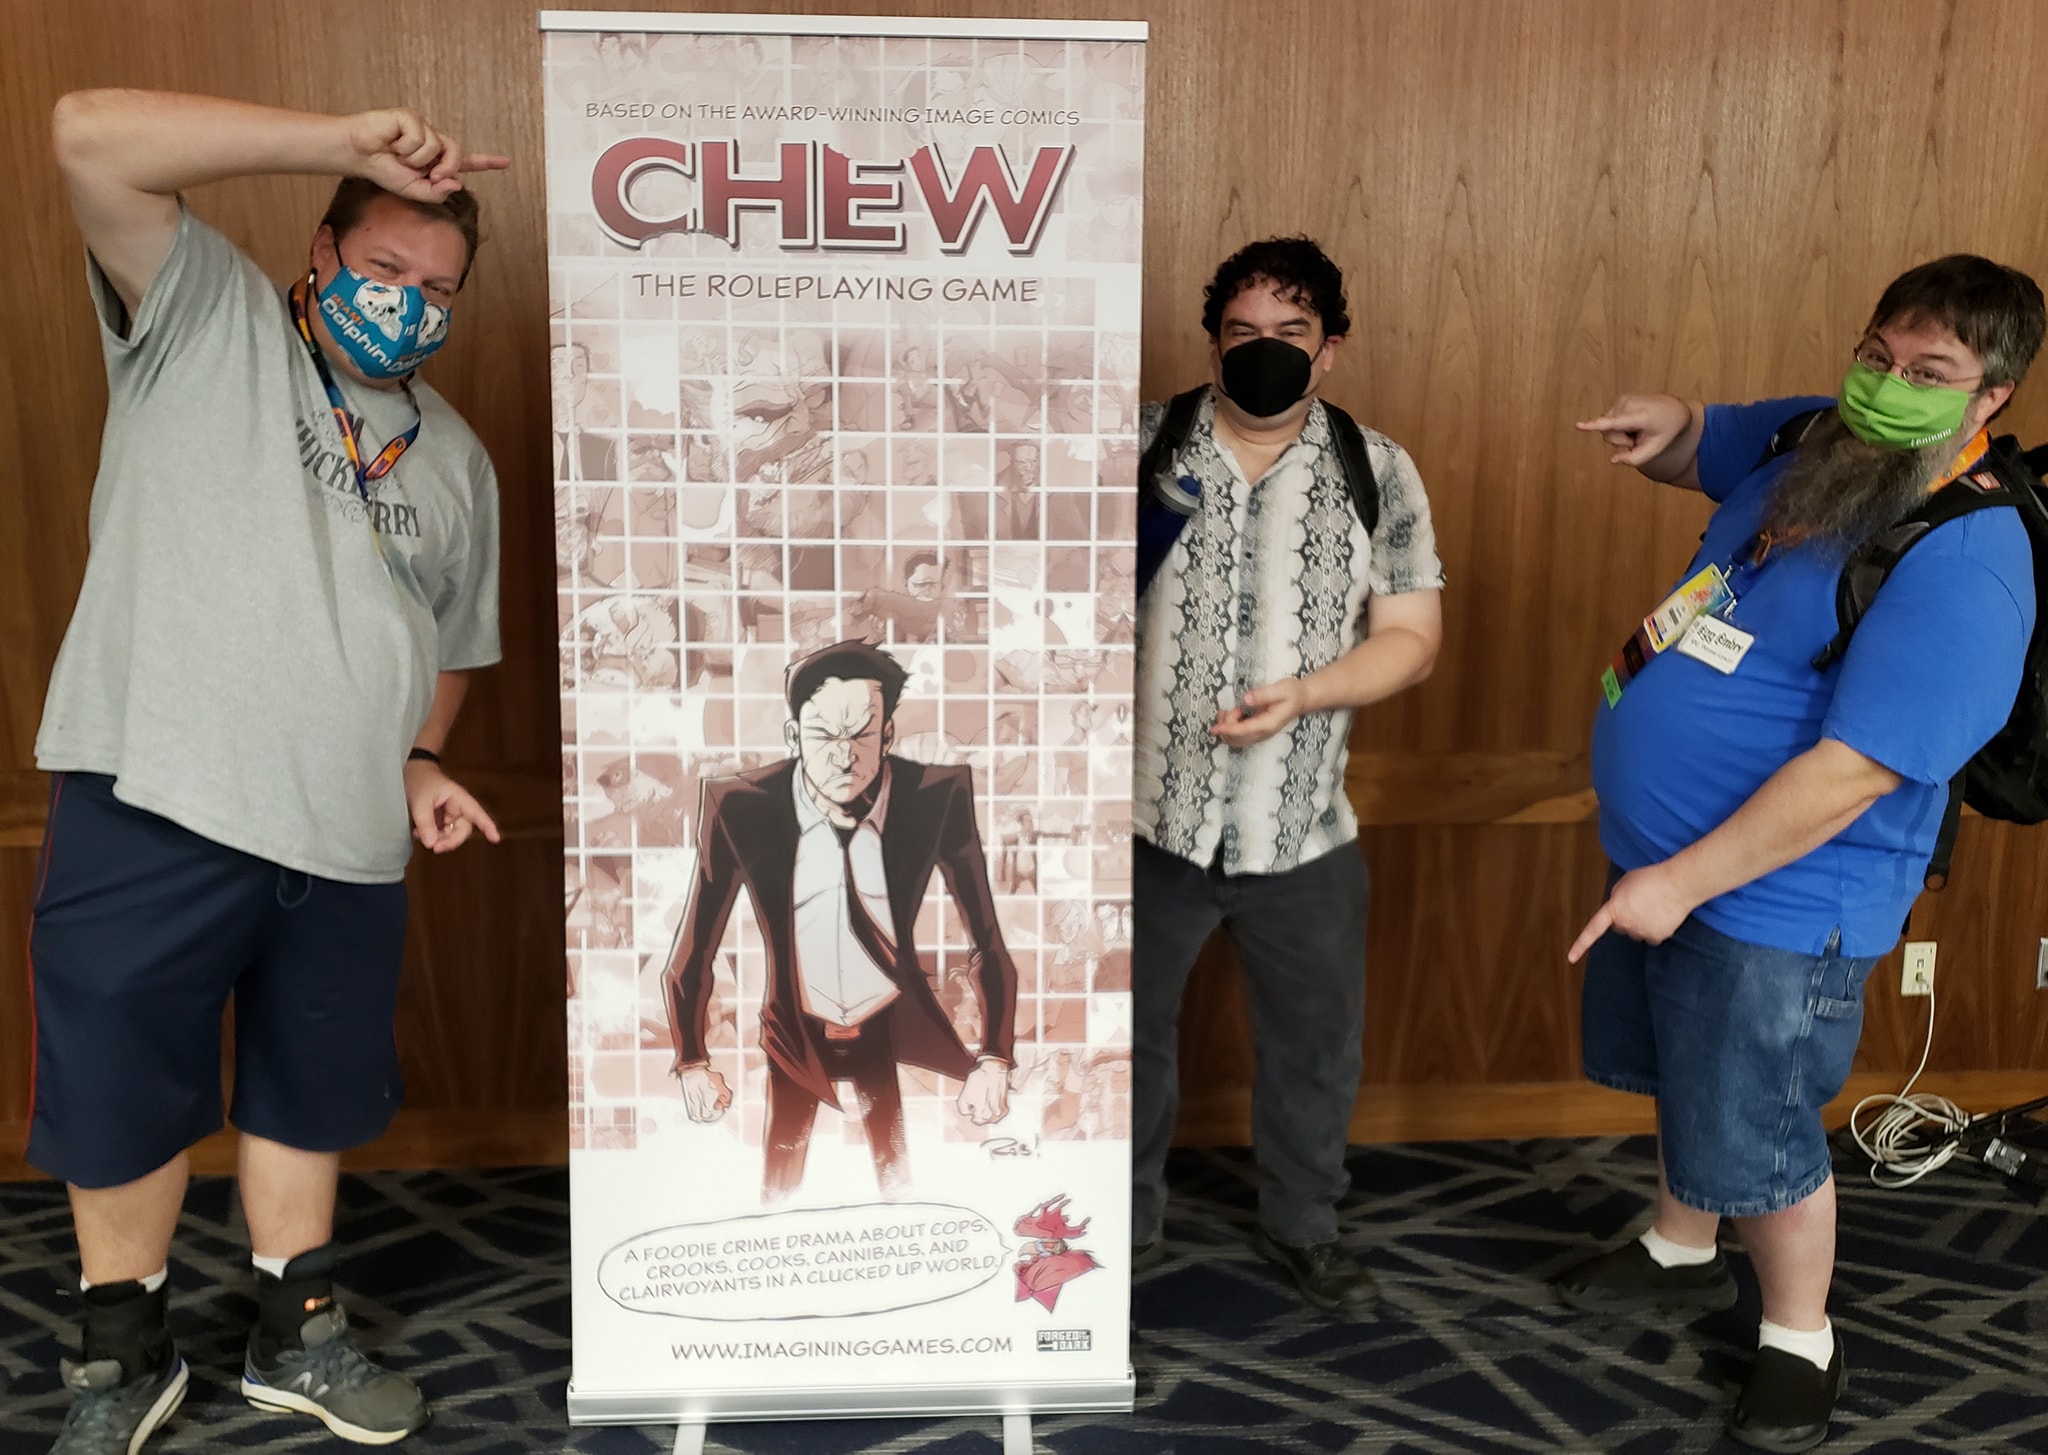 [L to R] John McGuire, Leland Beauchamp, and Egg Embry after playing CHEW.jpg